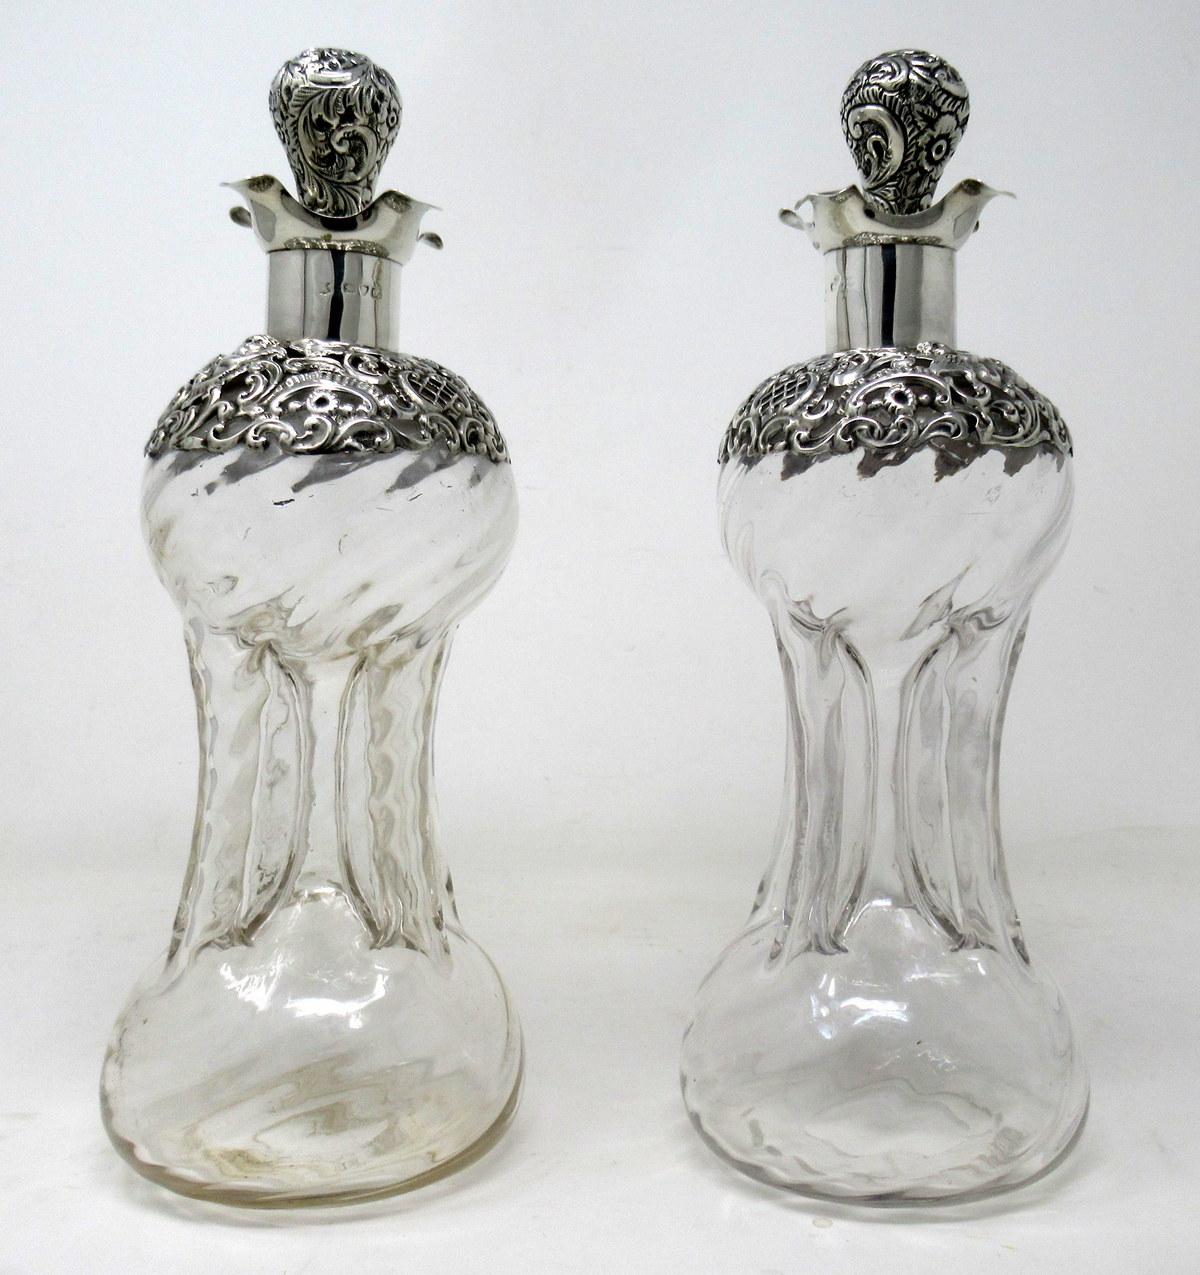 Stunning identical pair of English sterling silver mounted glass spirits or wine decanters of waisted form, late nineteenth century.

The unusual original silver covered ball formed glass stoppers above wavy shaped silver mounts and richly